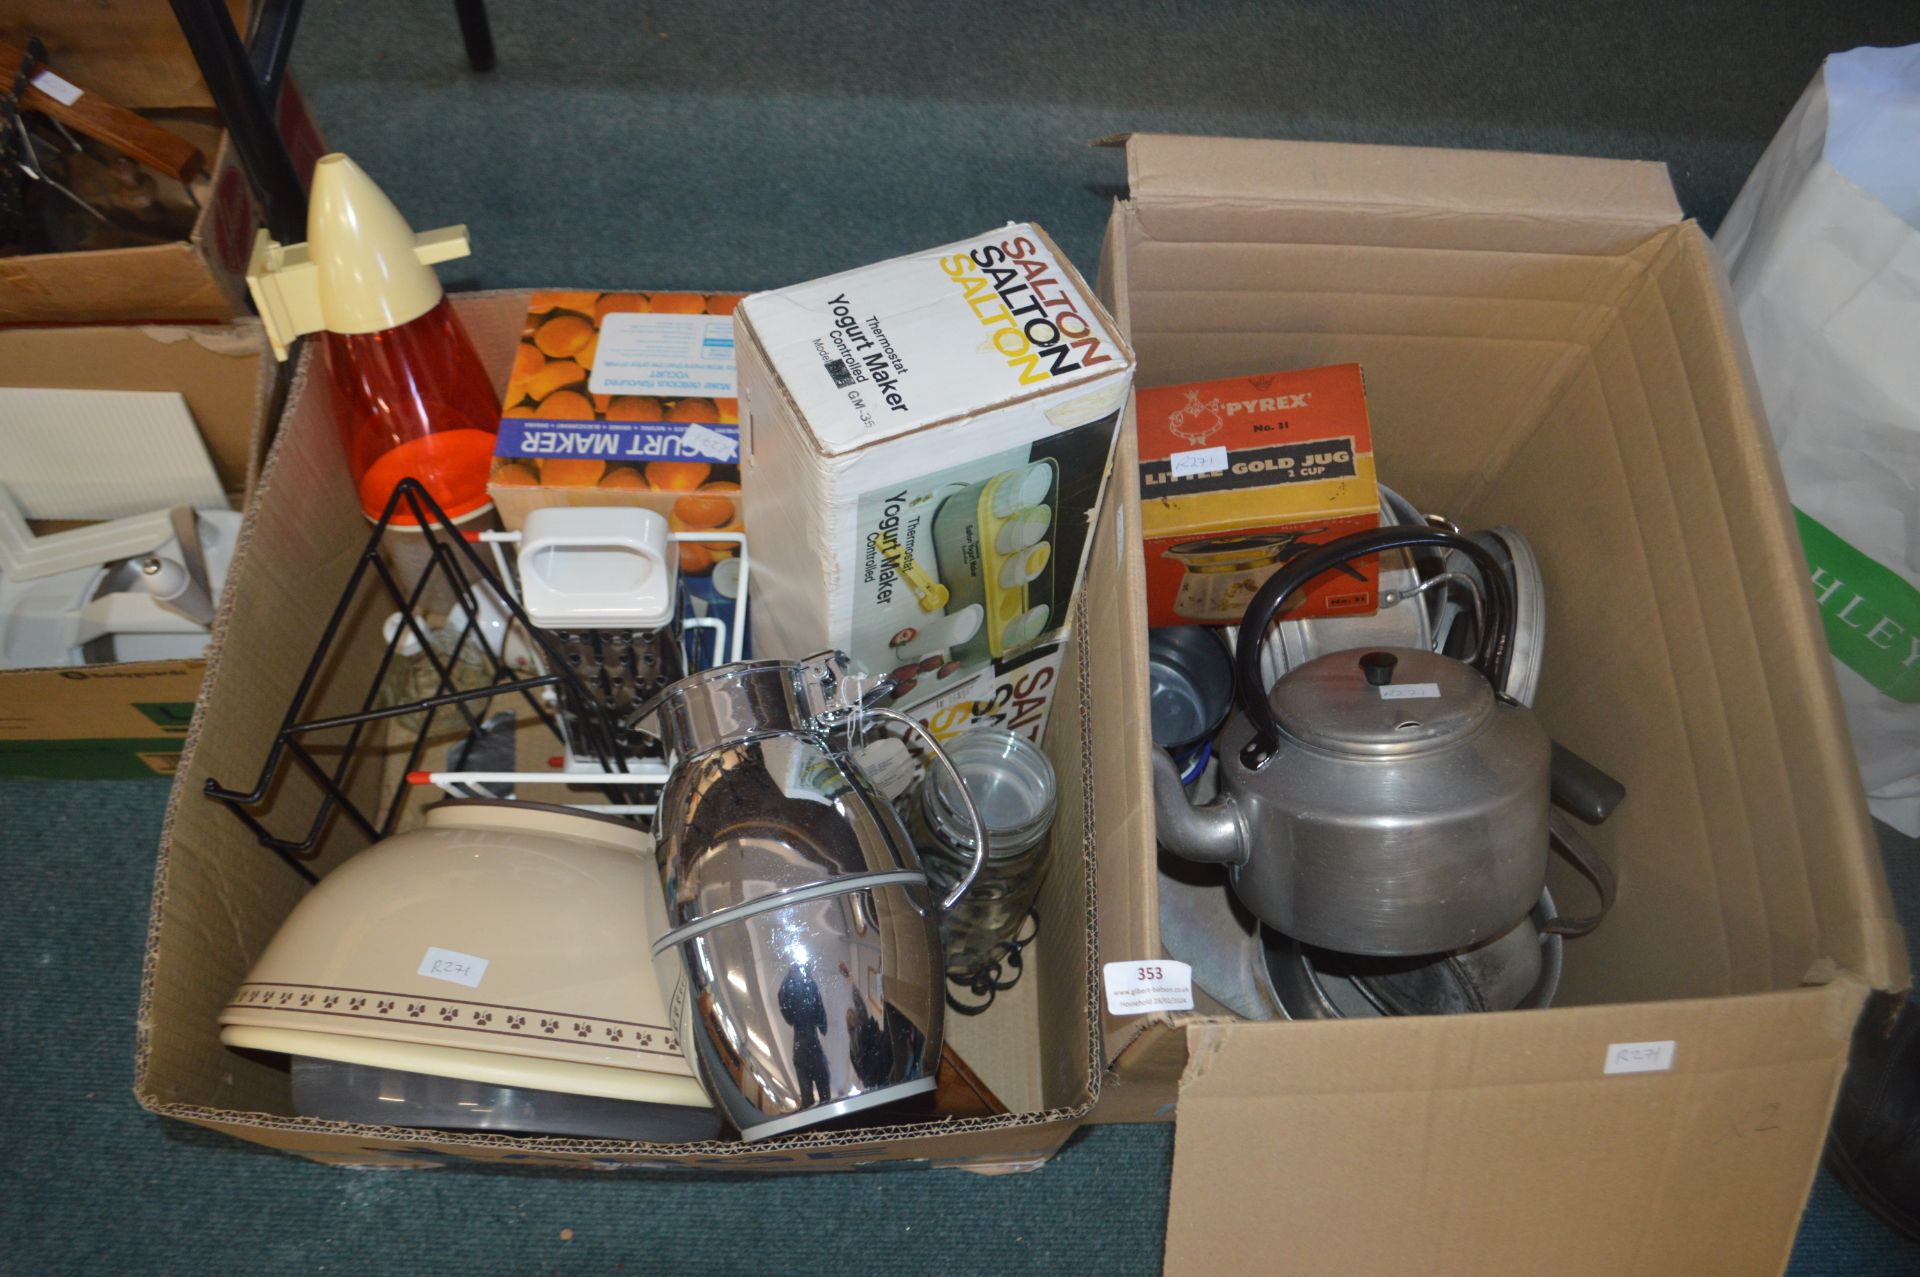 Two Boxes of Kitchenware